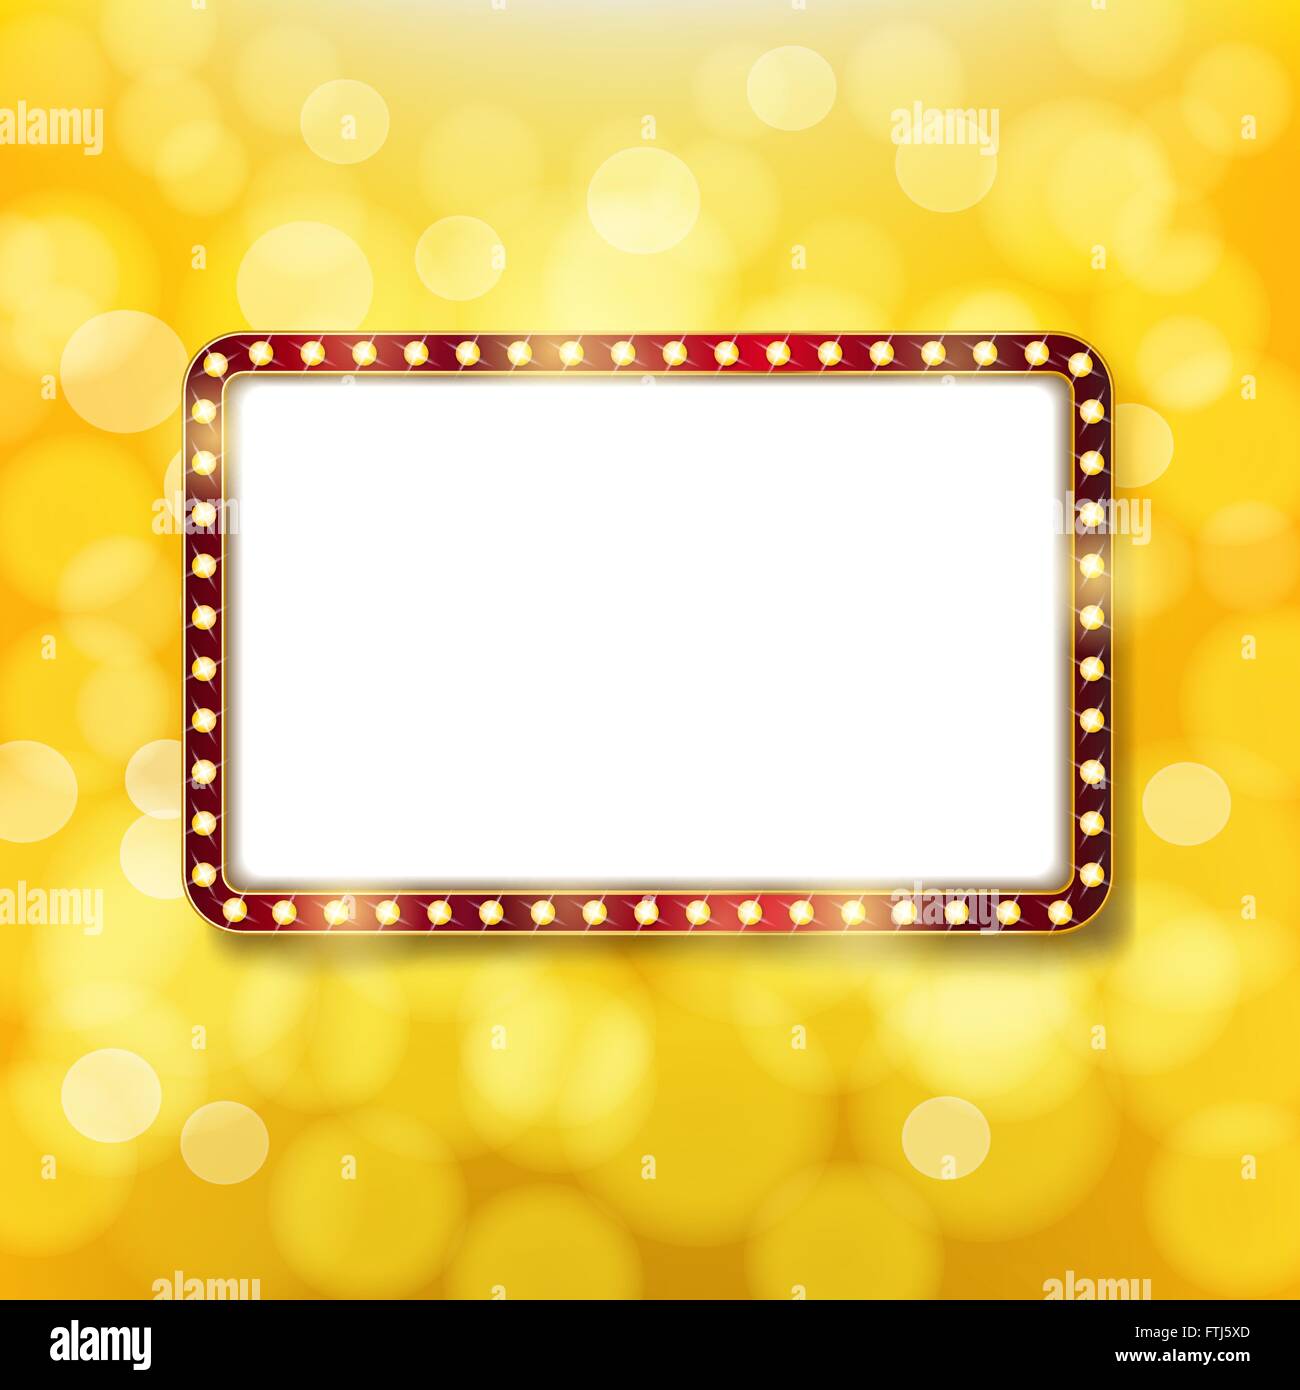 Game show background Stock Vector Images - Alamy